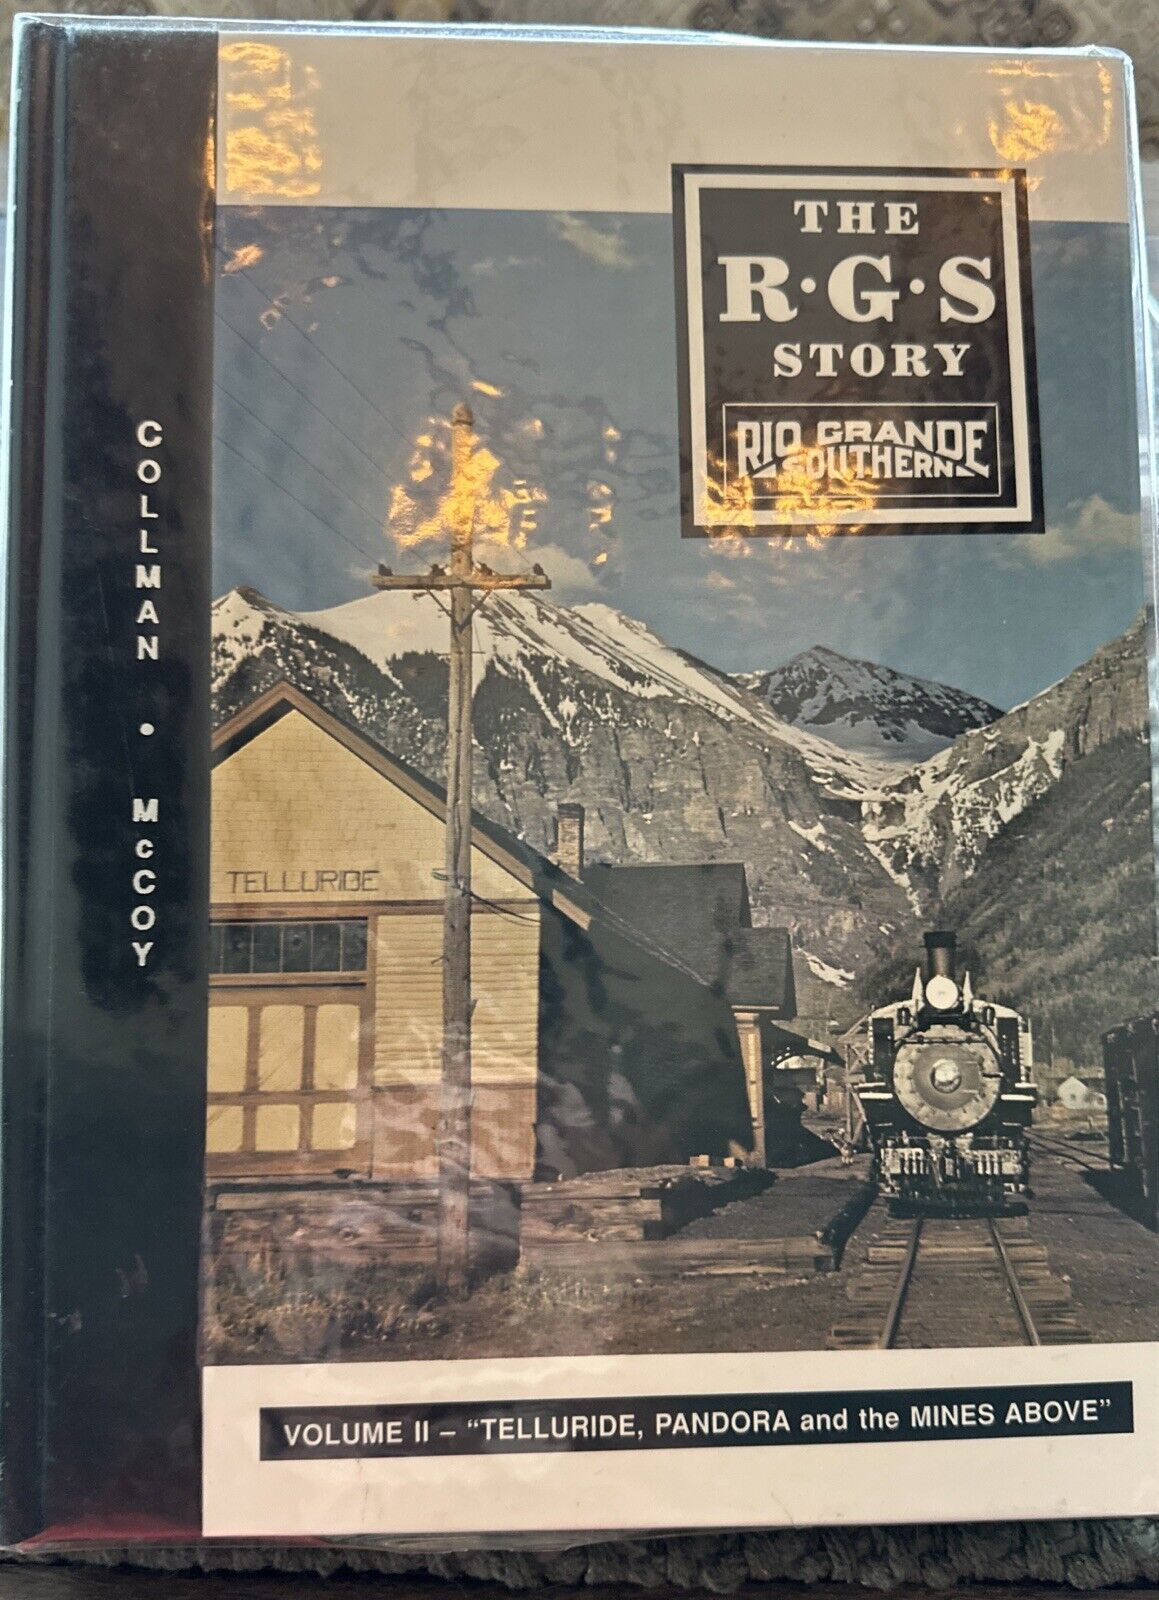 The R G S Story Volume II Telluride, Pandora & the Mines Above HC  Signed Copy